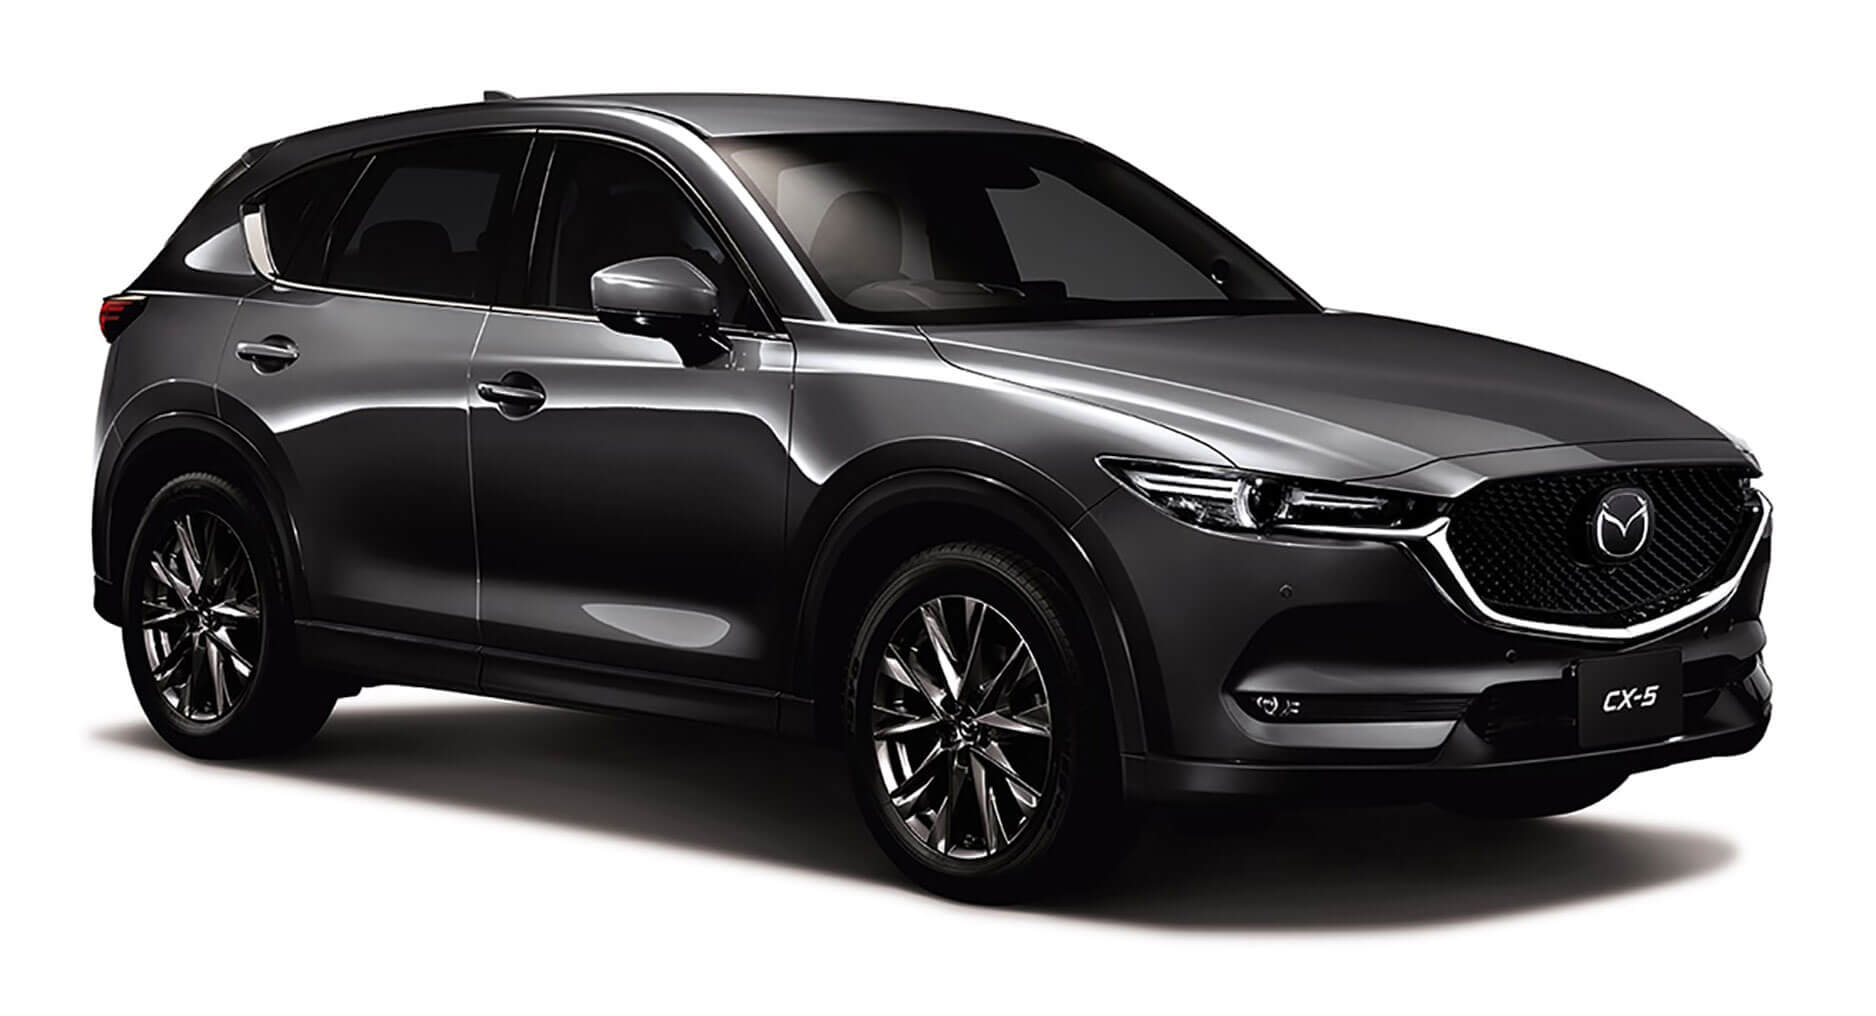 2019 Mazda CX-5 Debuts In Japan With CX-9's 2.5T Engine, Exclusive Mode ...